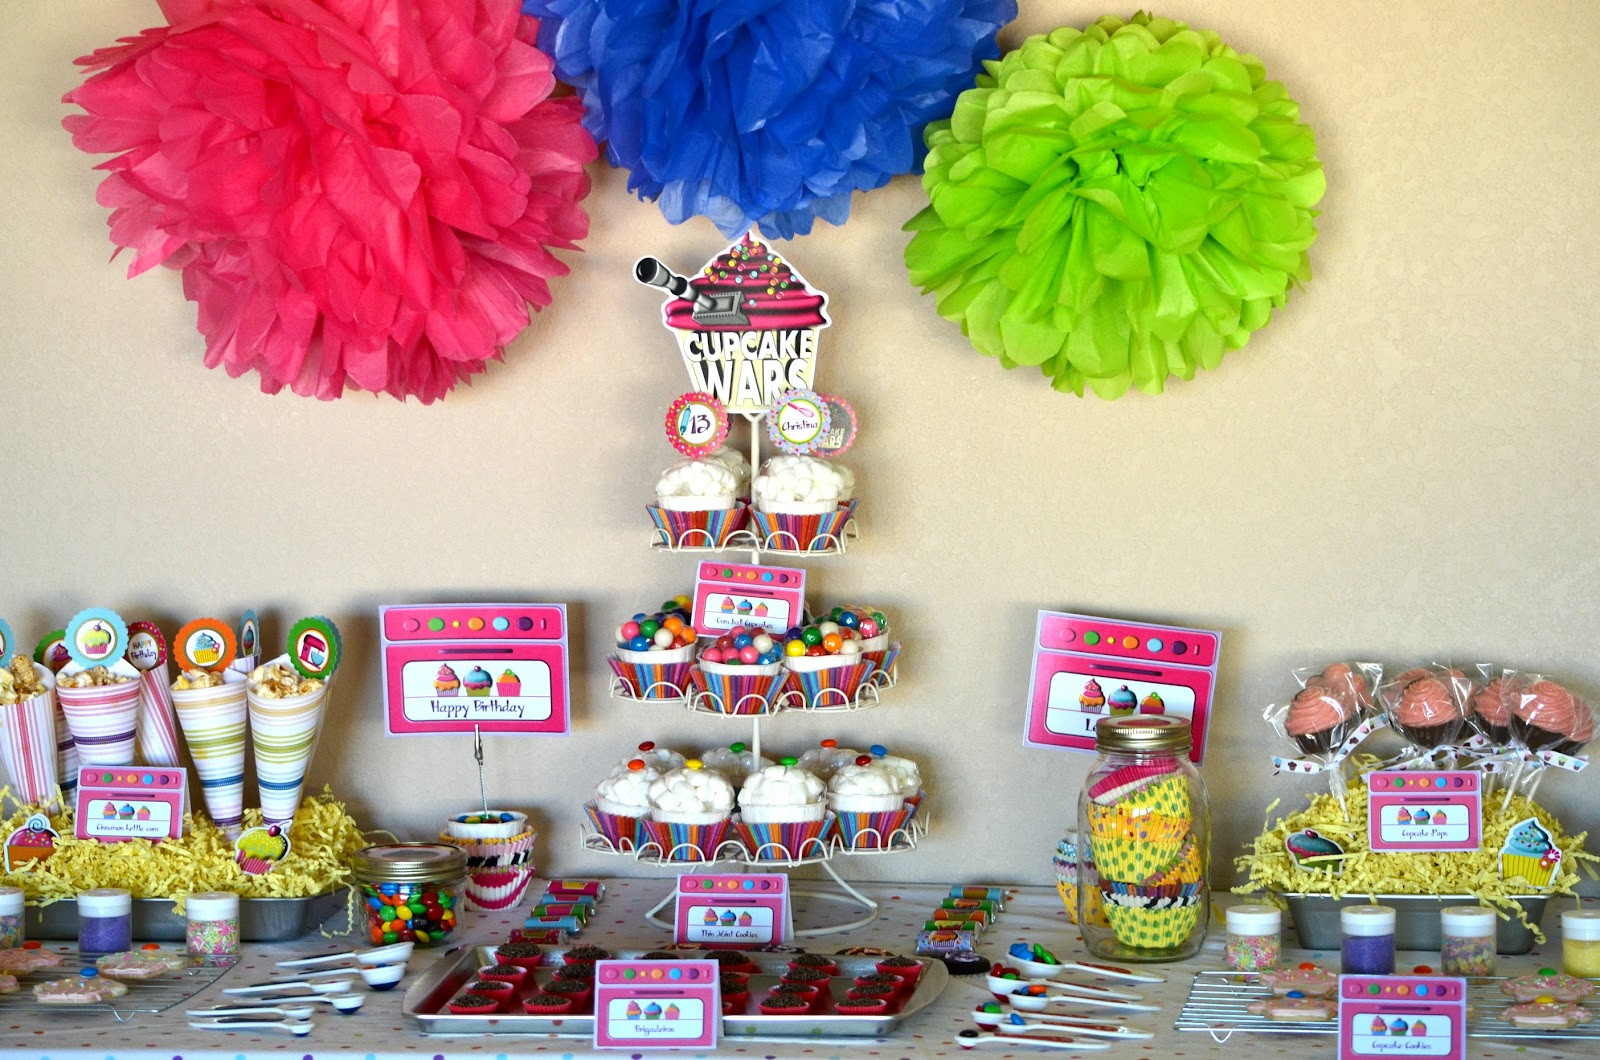 Cupcake Birthday Party Ideas
 Crissy s Crafts Cupcake Wars Party